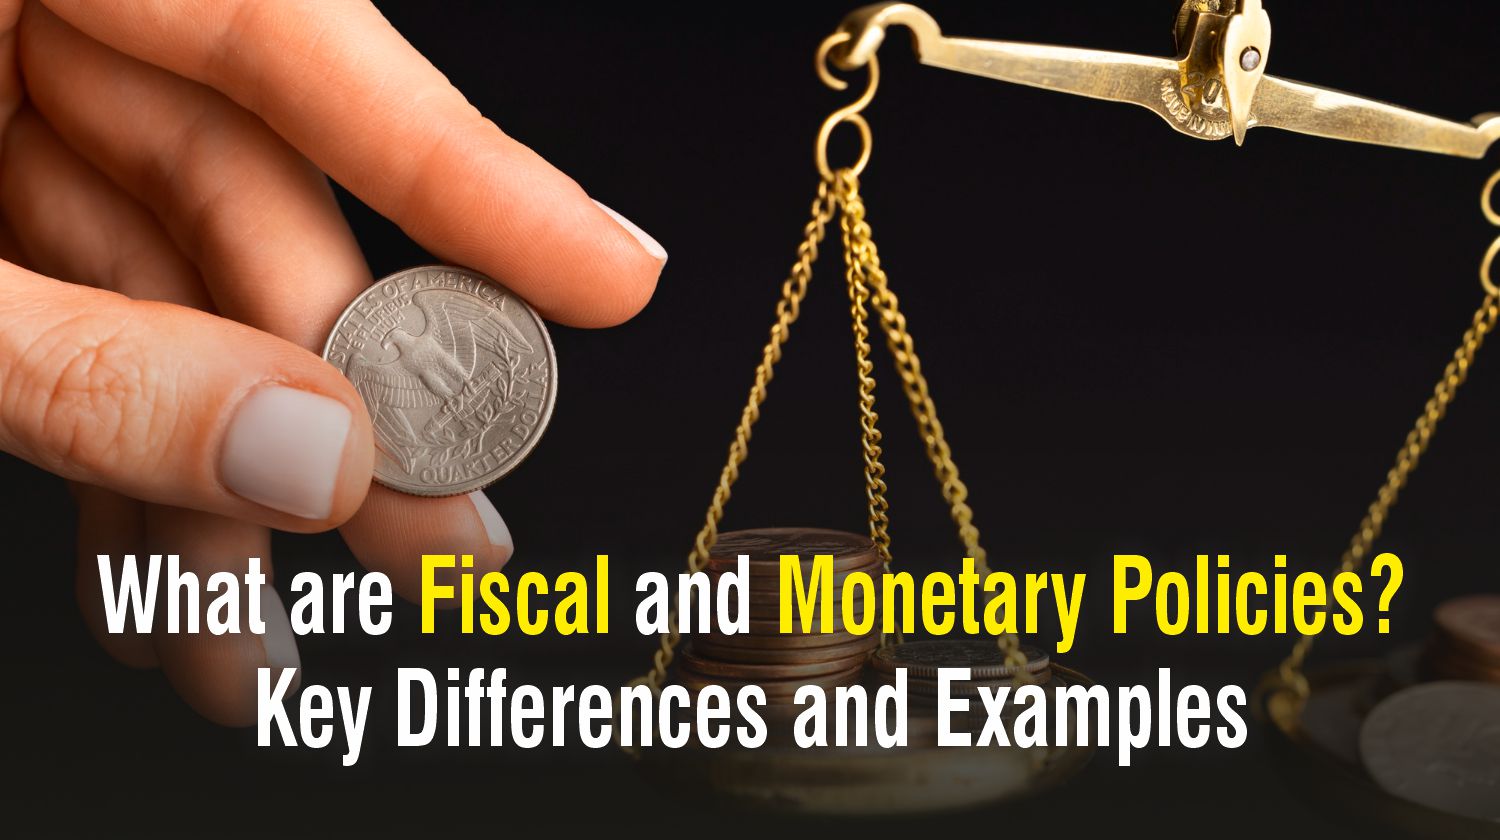 What are Fiscal and Monetary Policies? Key Differences and Examples